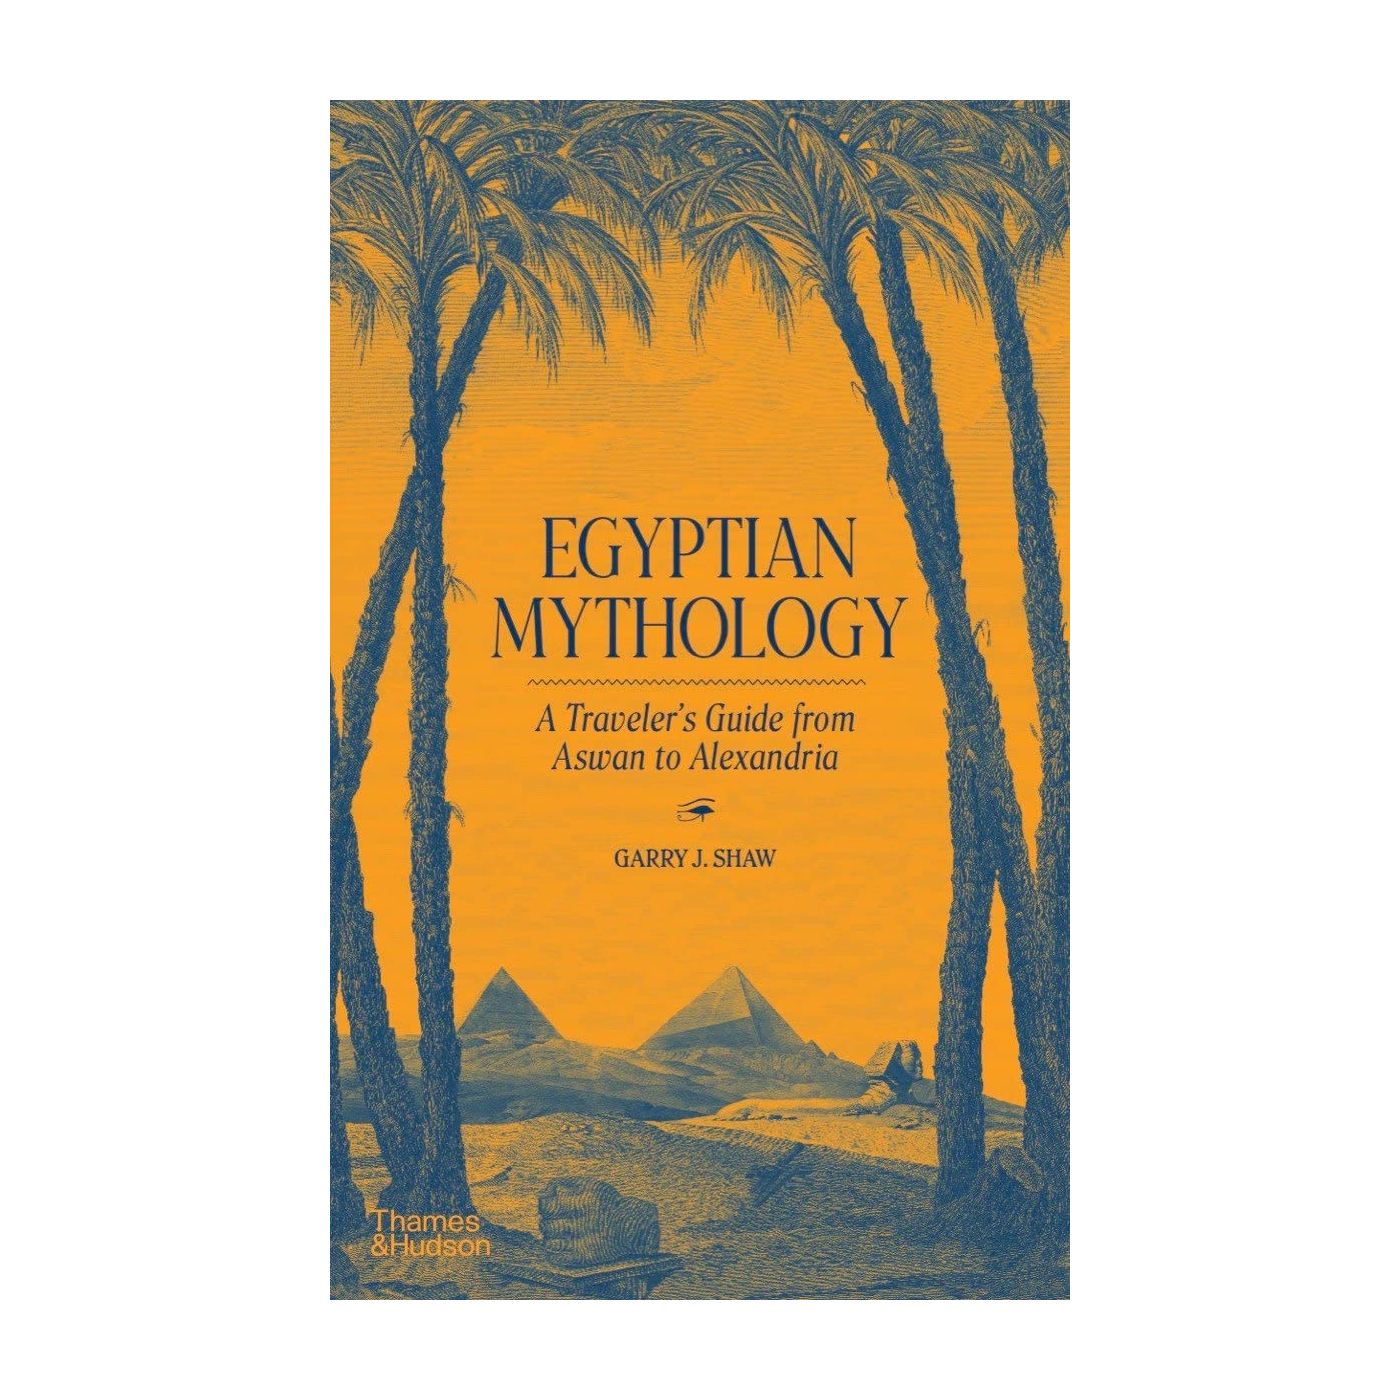 Egyptian Mythology: a Traveller's Guide from Aswan to Alexandria